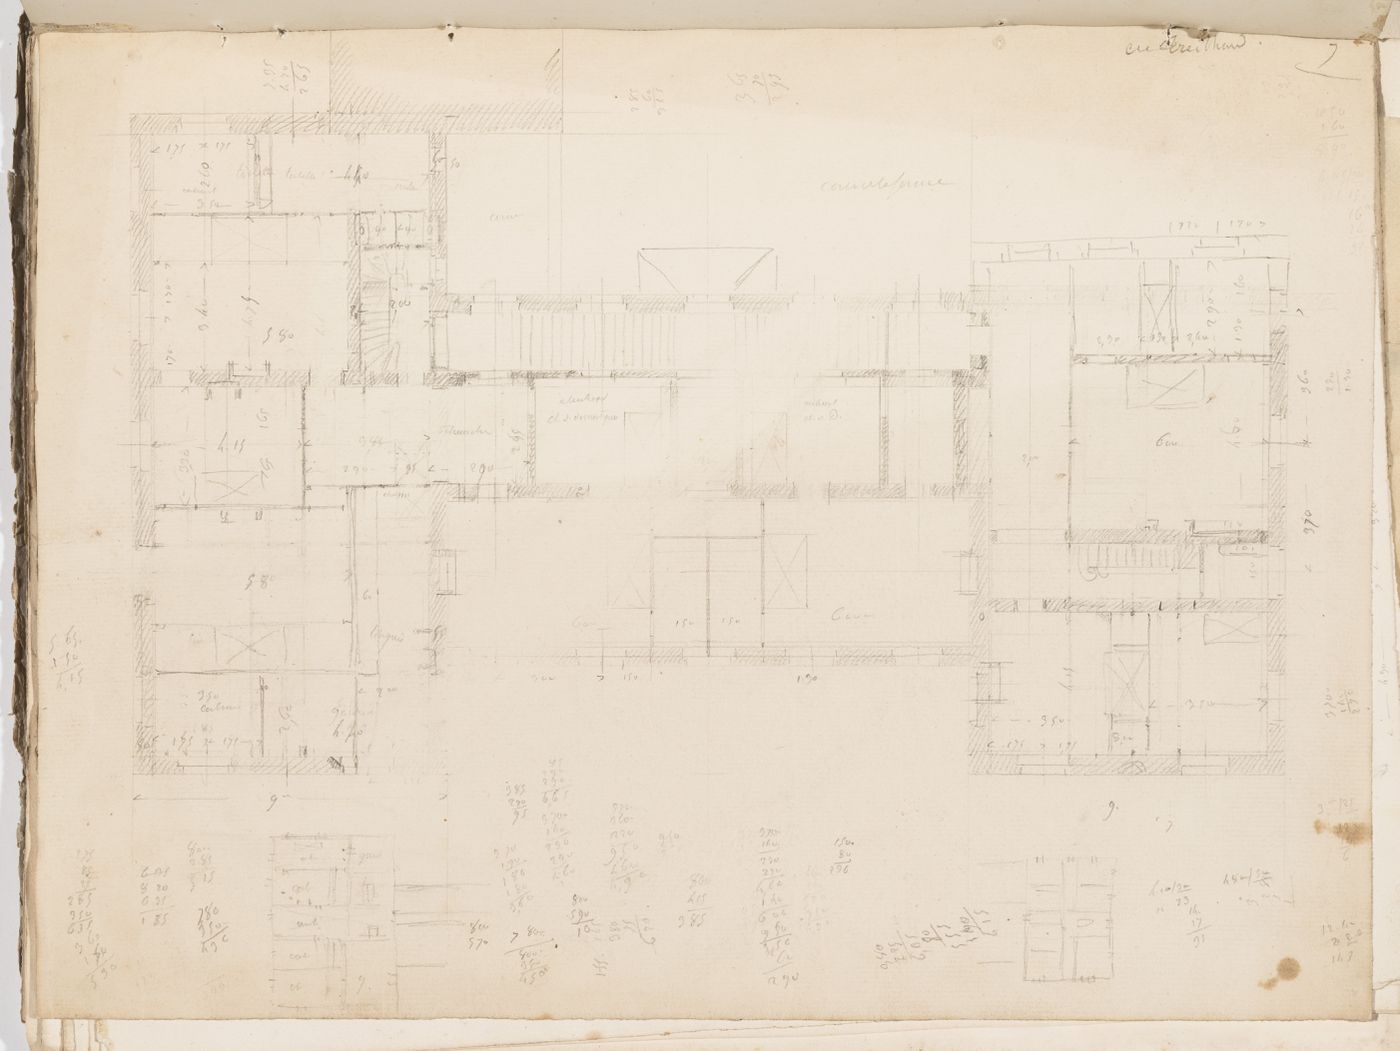 Project no. 7 for a country house for comte Treilhard: First floor plan